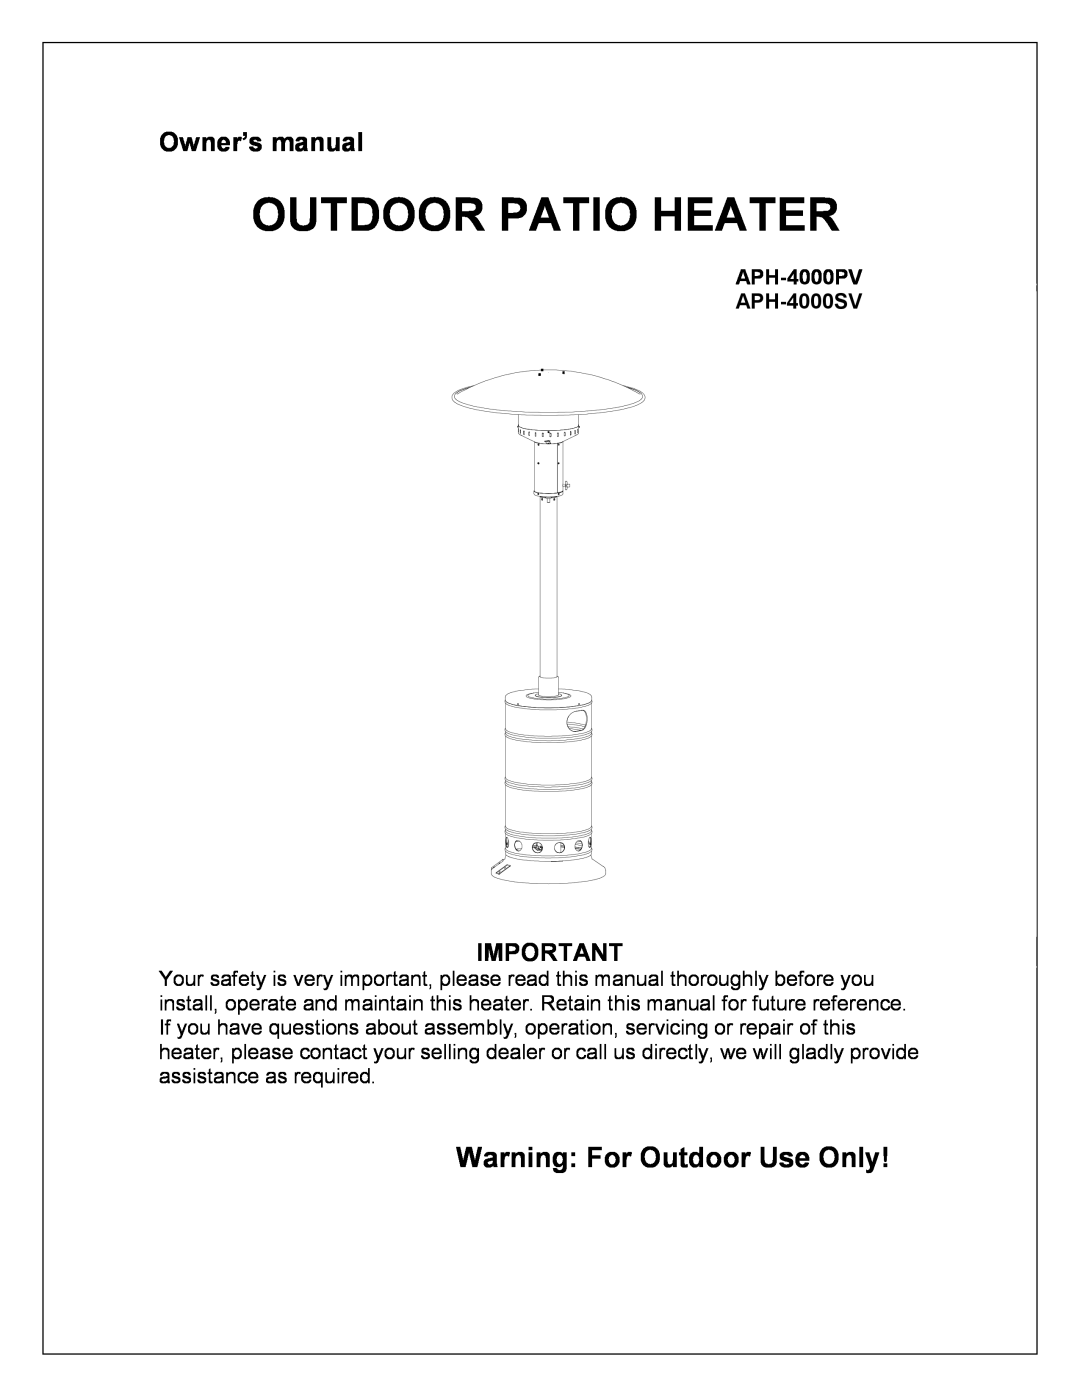 NewAir APH-4000PV owner manual Outdoor Patio Heater, Warning For Outdoor Use Only 